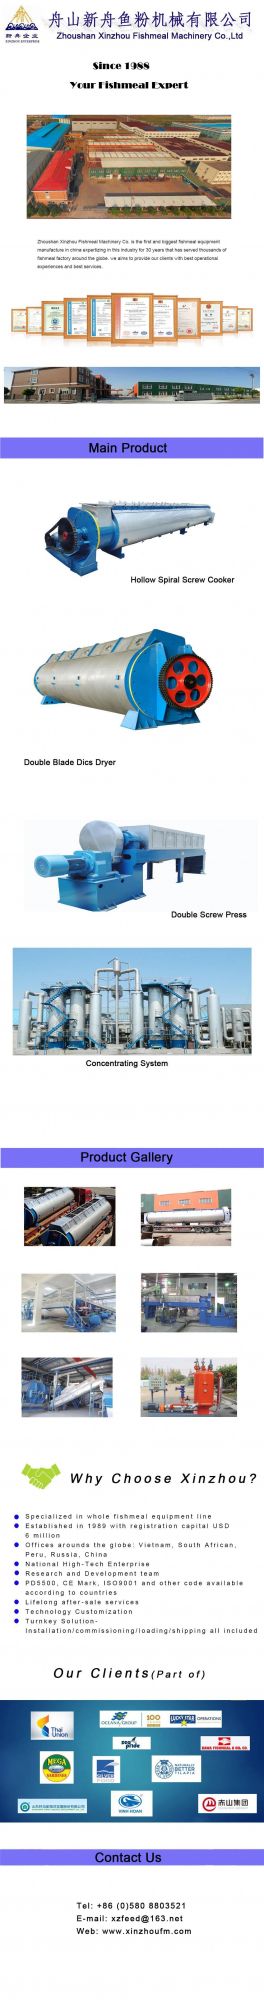 Poultry Meal Machine Total Solution Turn Key Project (Xinzhou Brand)